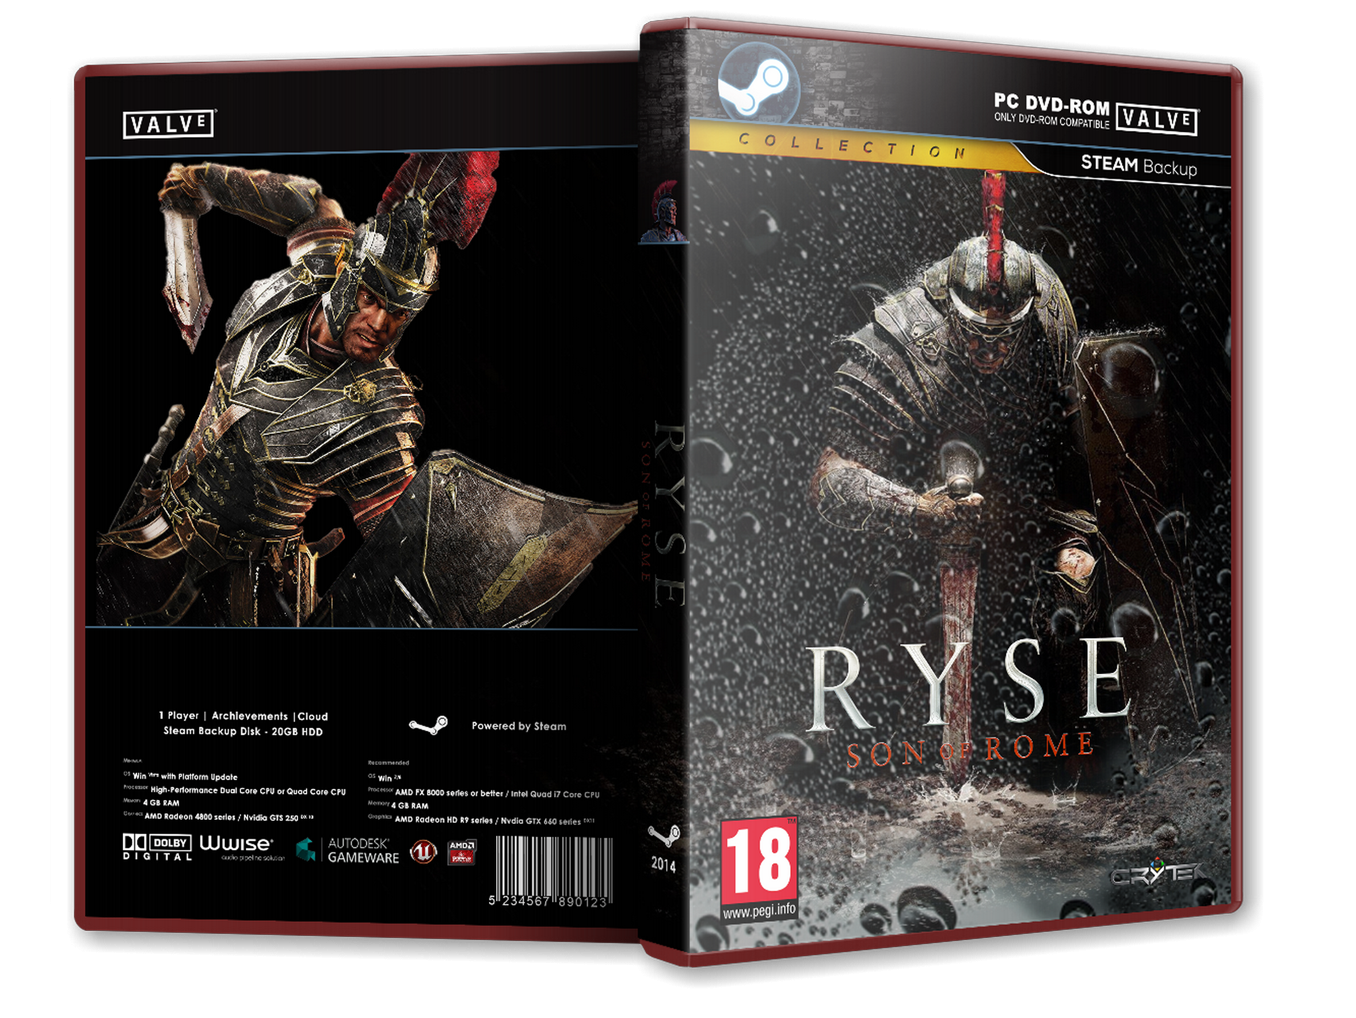 ryse son of rome box cover